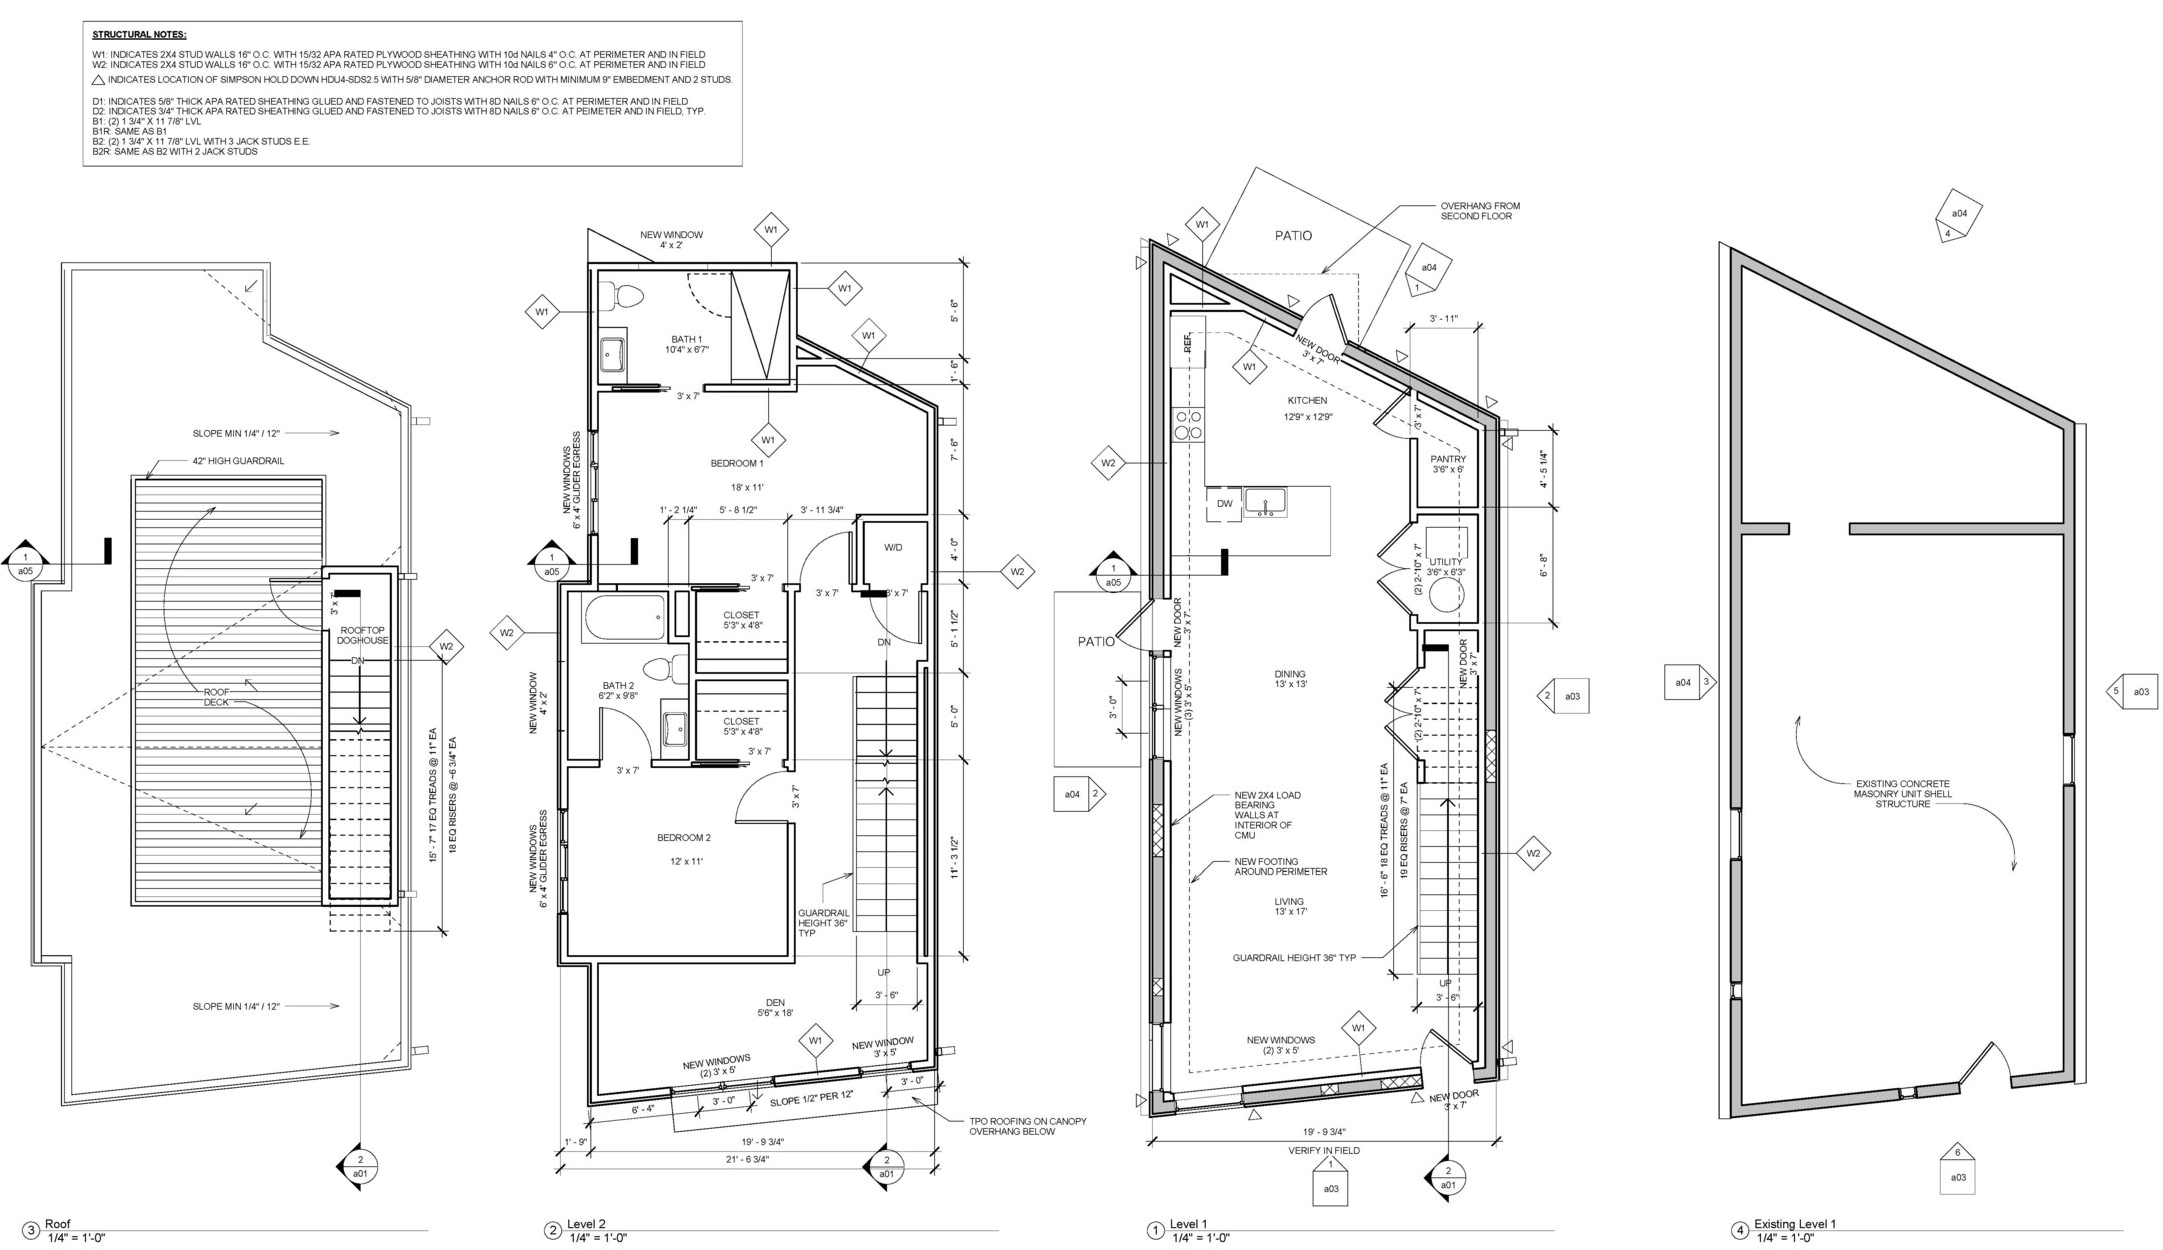 195 howell drive construction documents revised_Page_2.jpg